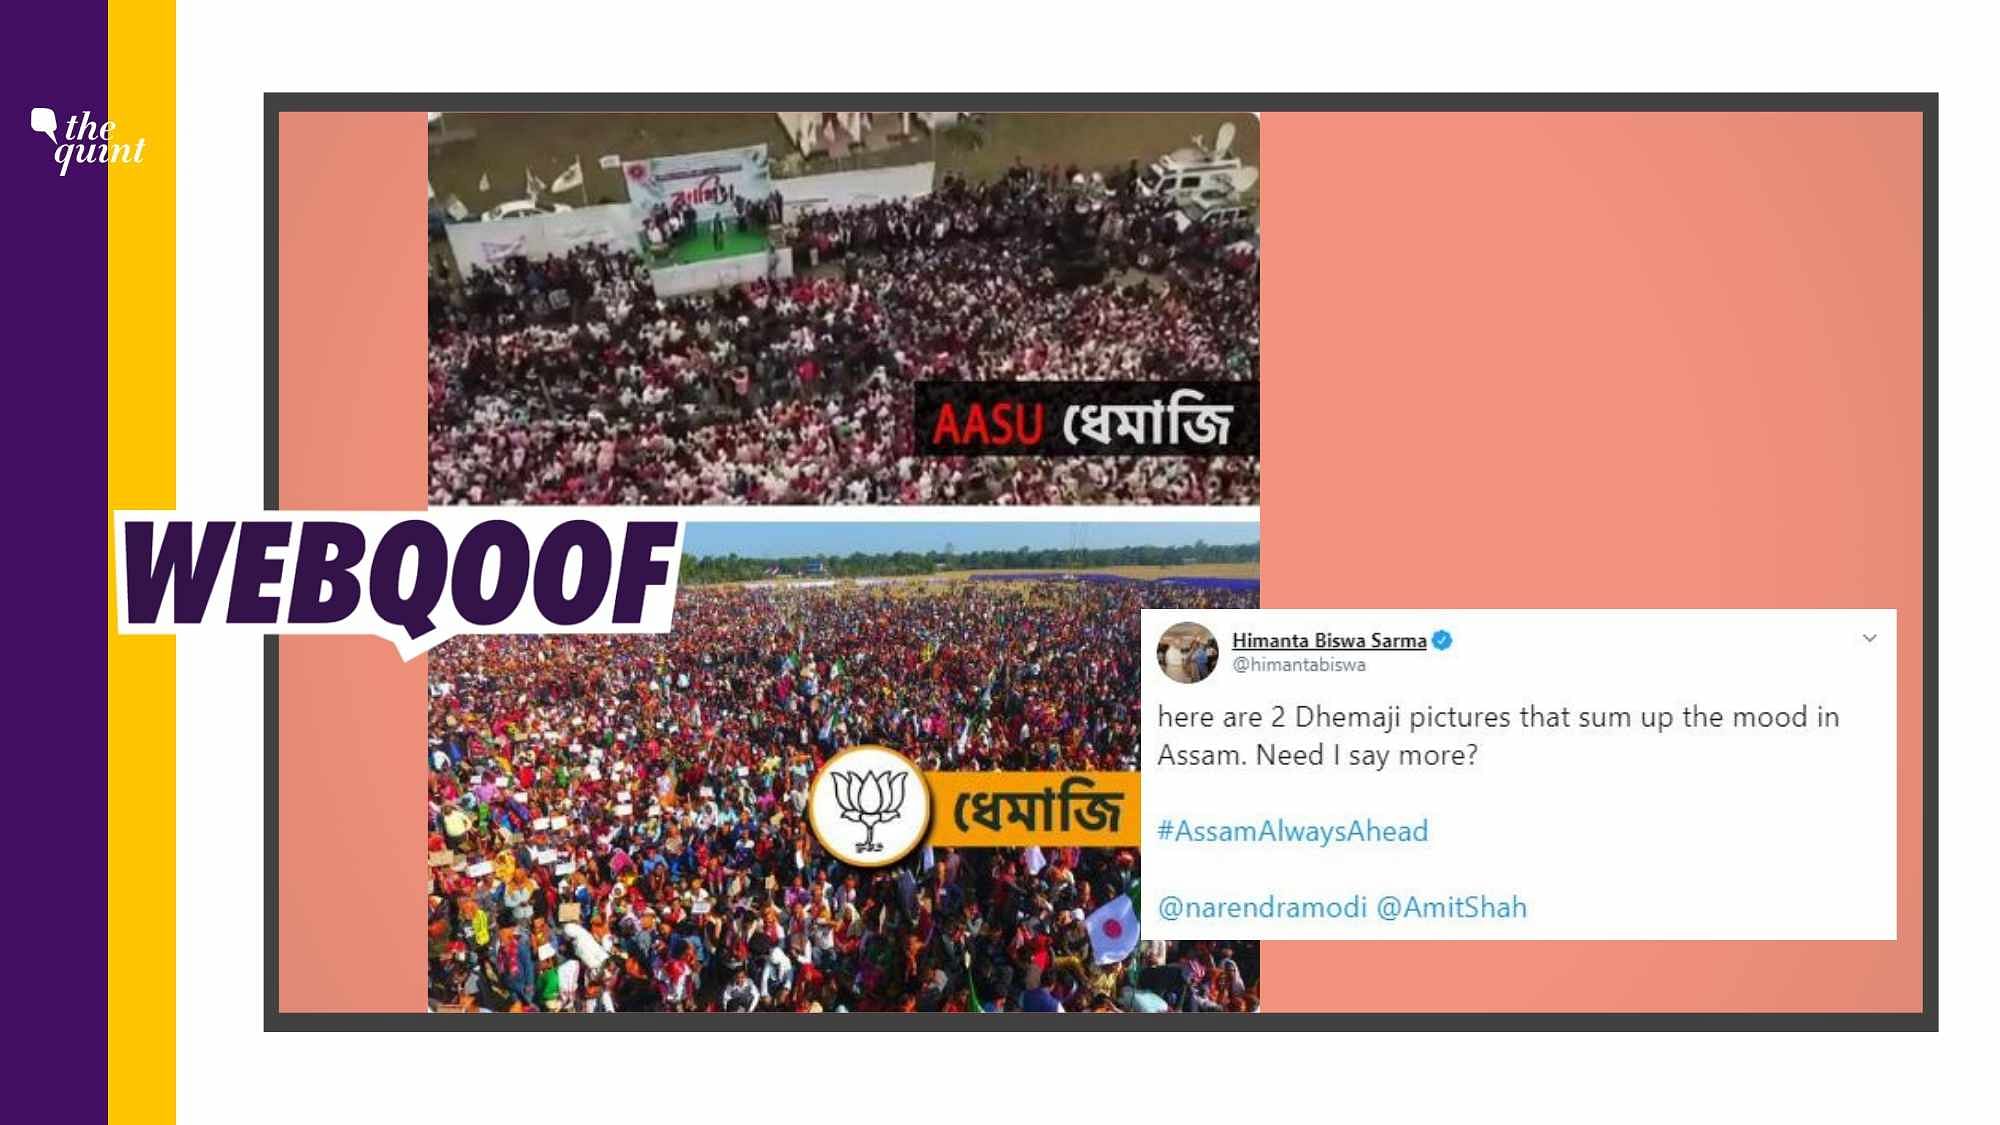 Assam Finance Minister Himanta Biswa Sarma has shared two pictures of rallies held in Assam’s Dhemaji.